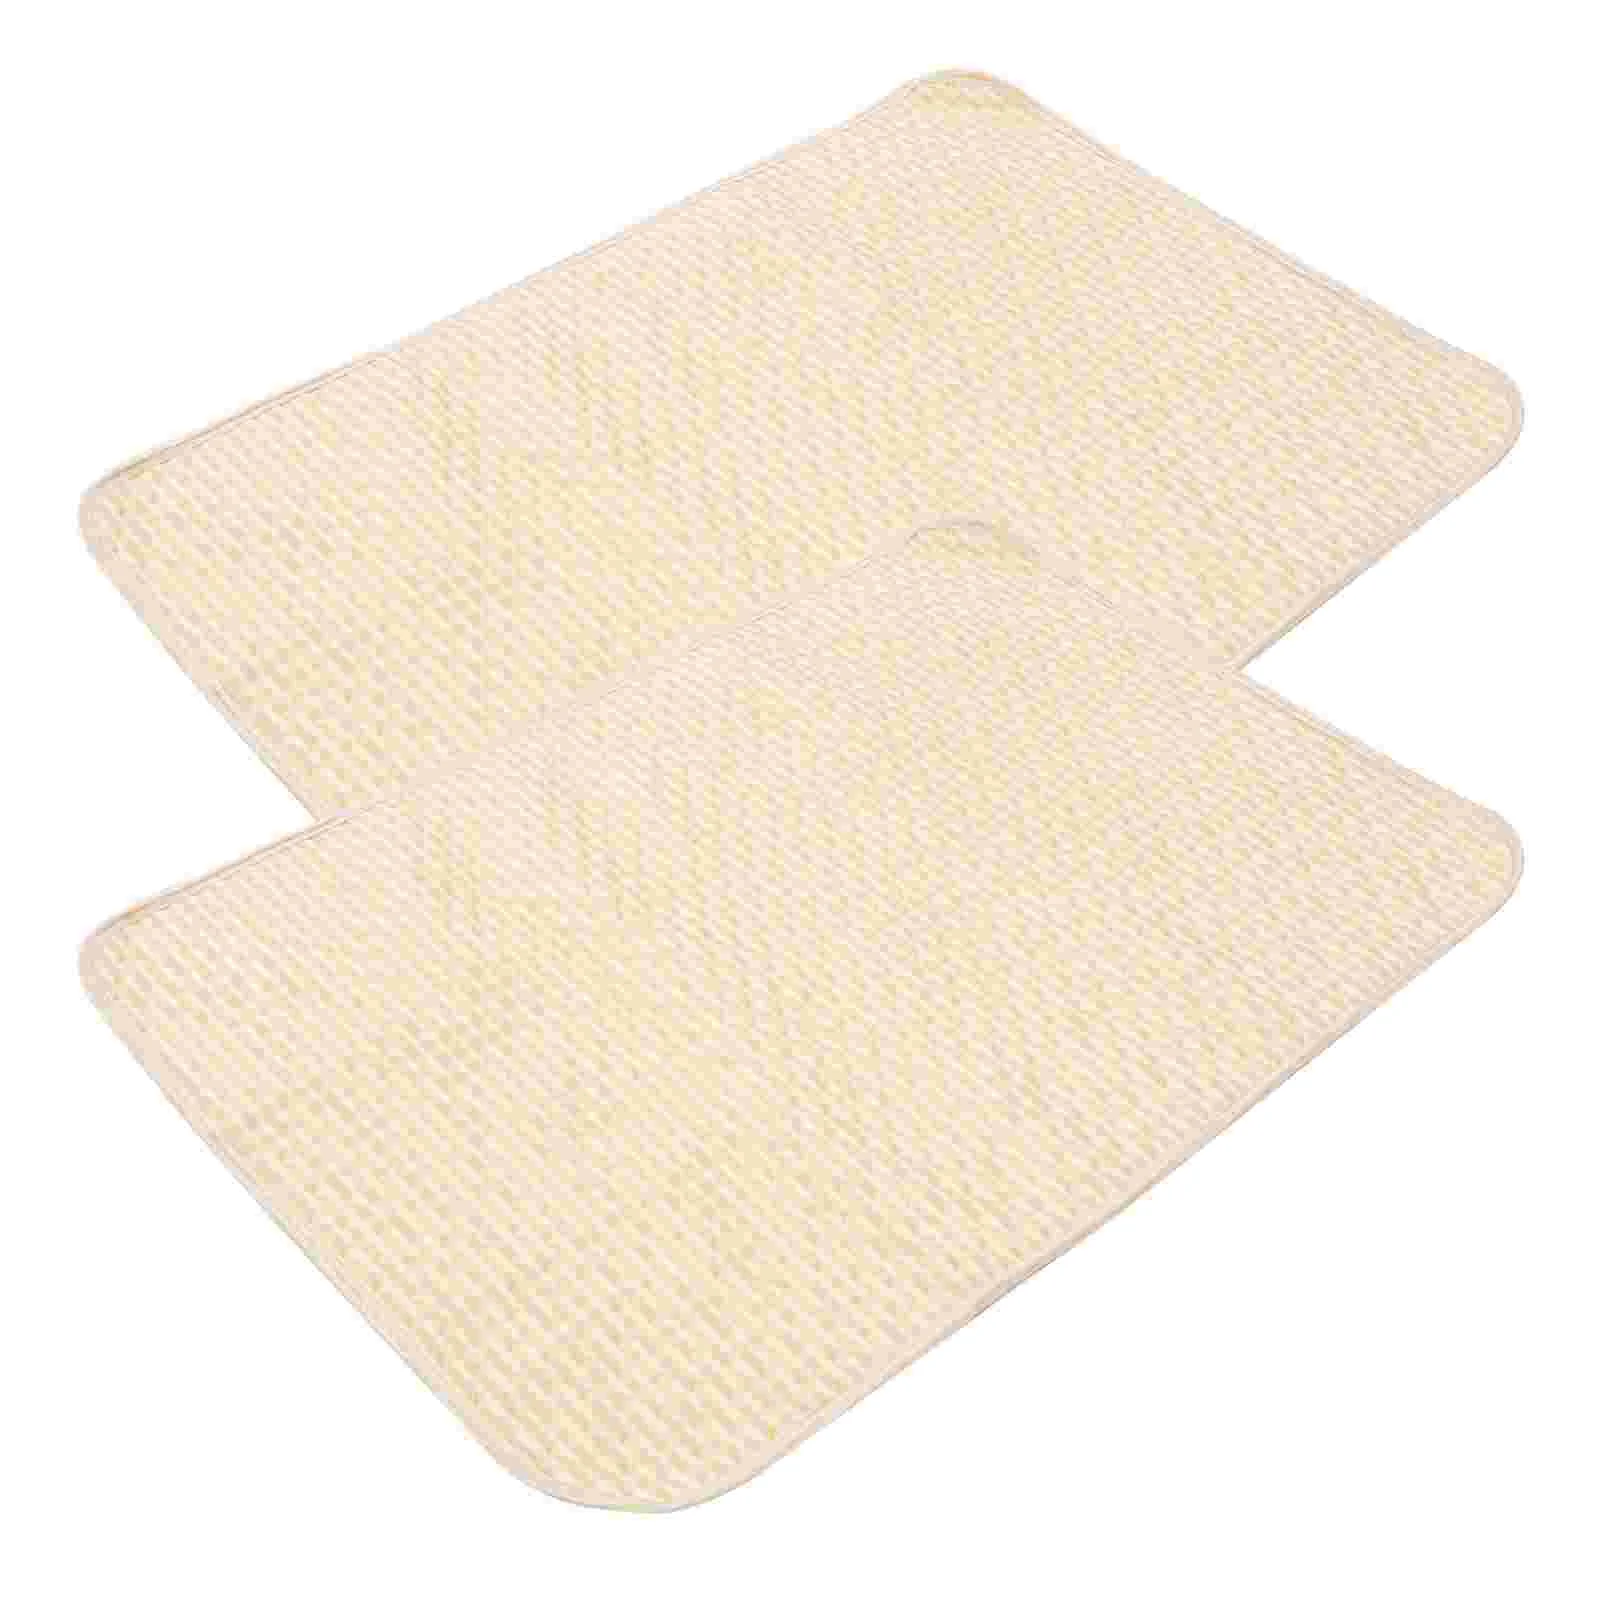 

Pads Pee Dog Pet Washable Pad Mat Incontinence Puppy Dogs Urine Mats Protector Reusable Cats Sheet Cage Bed Sofa Floor Whelping